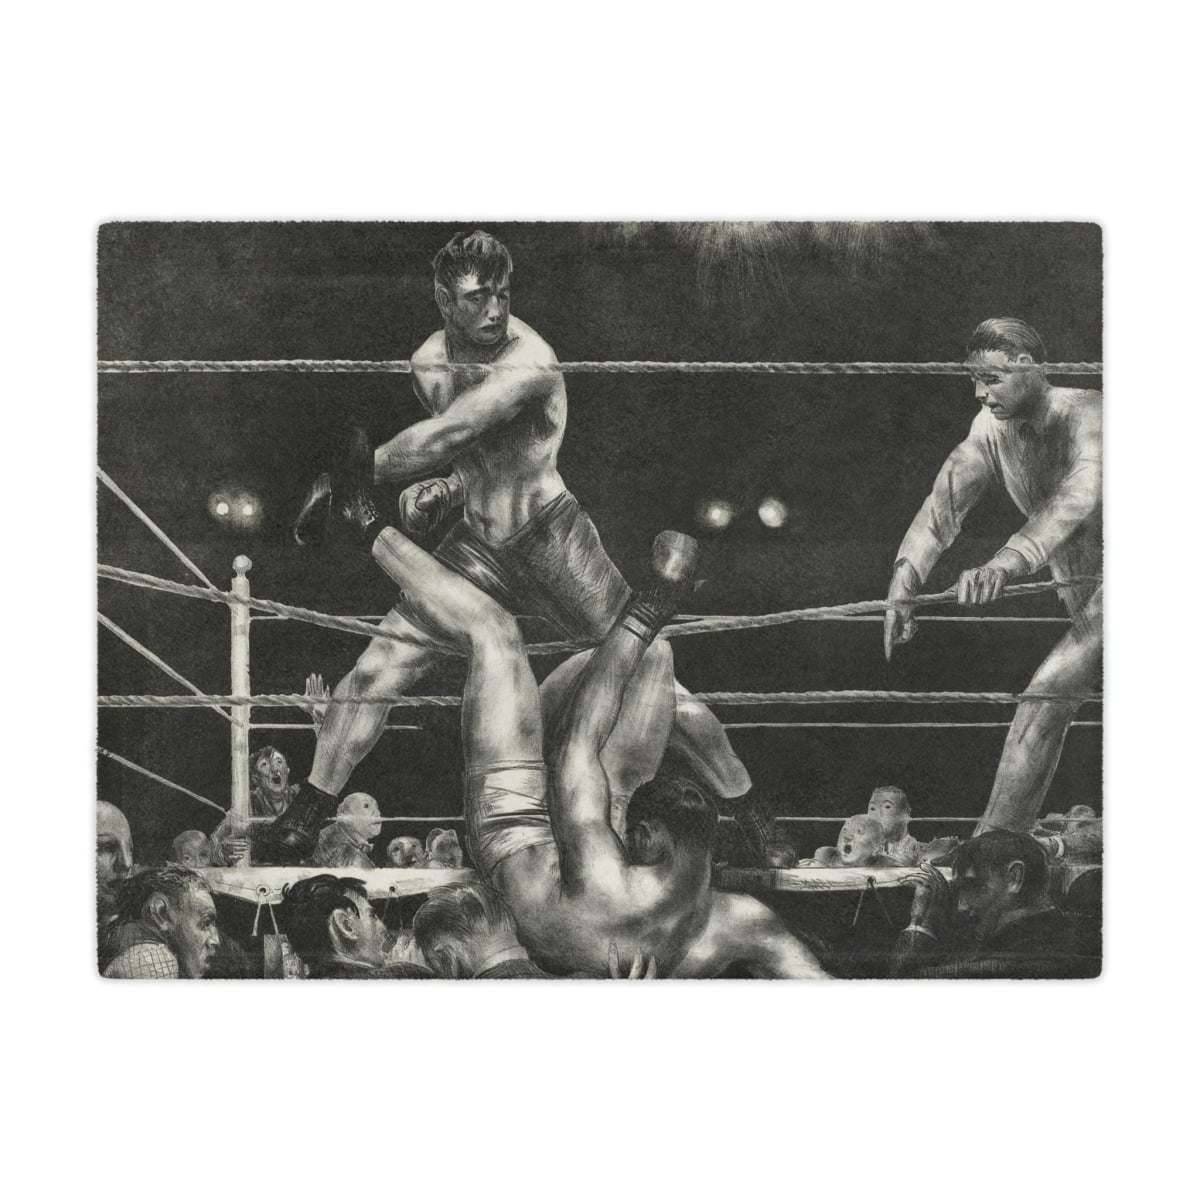 Boxing Legends Inspired Blanket with George Bellows Art